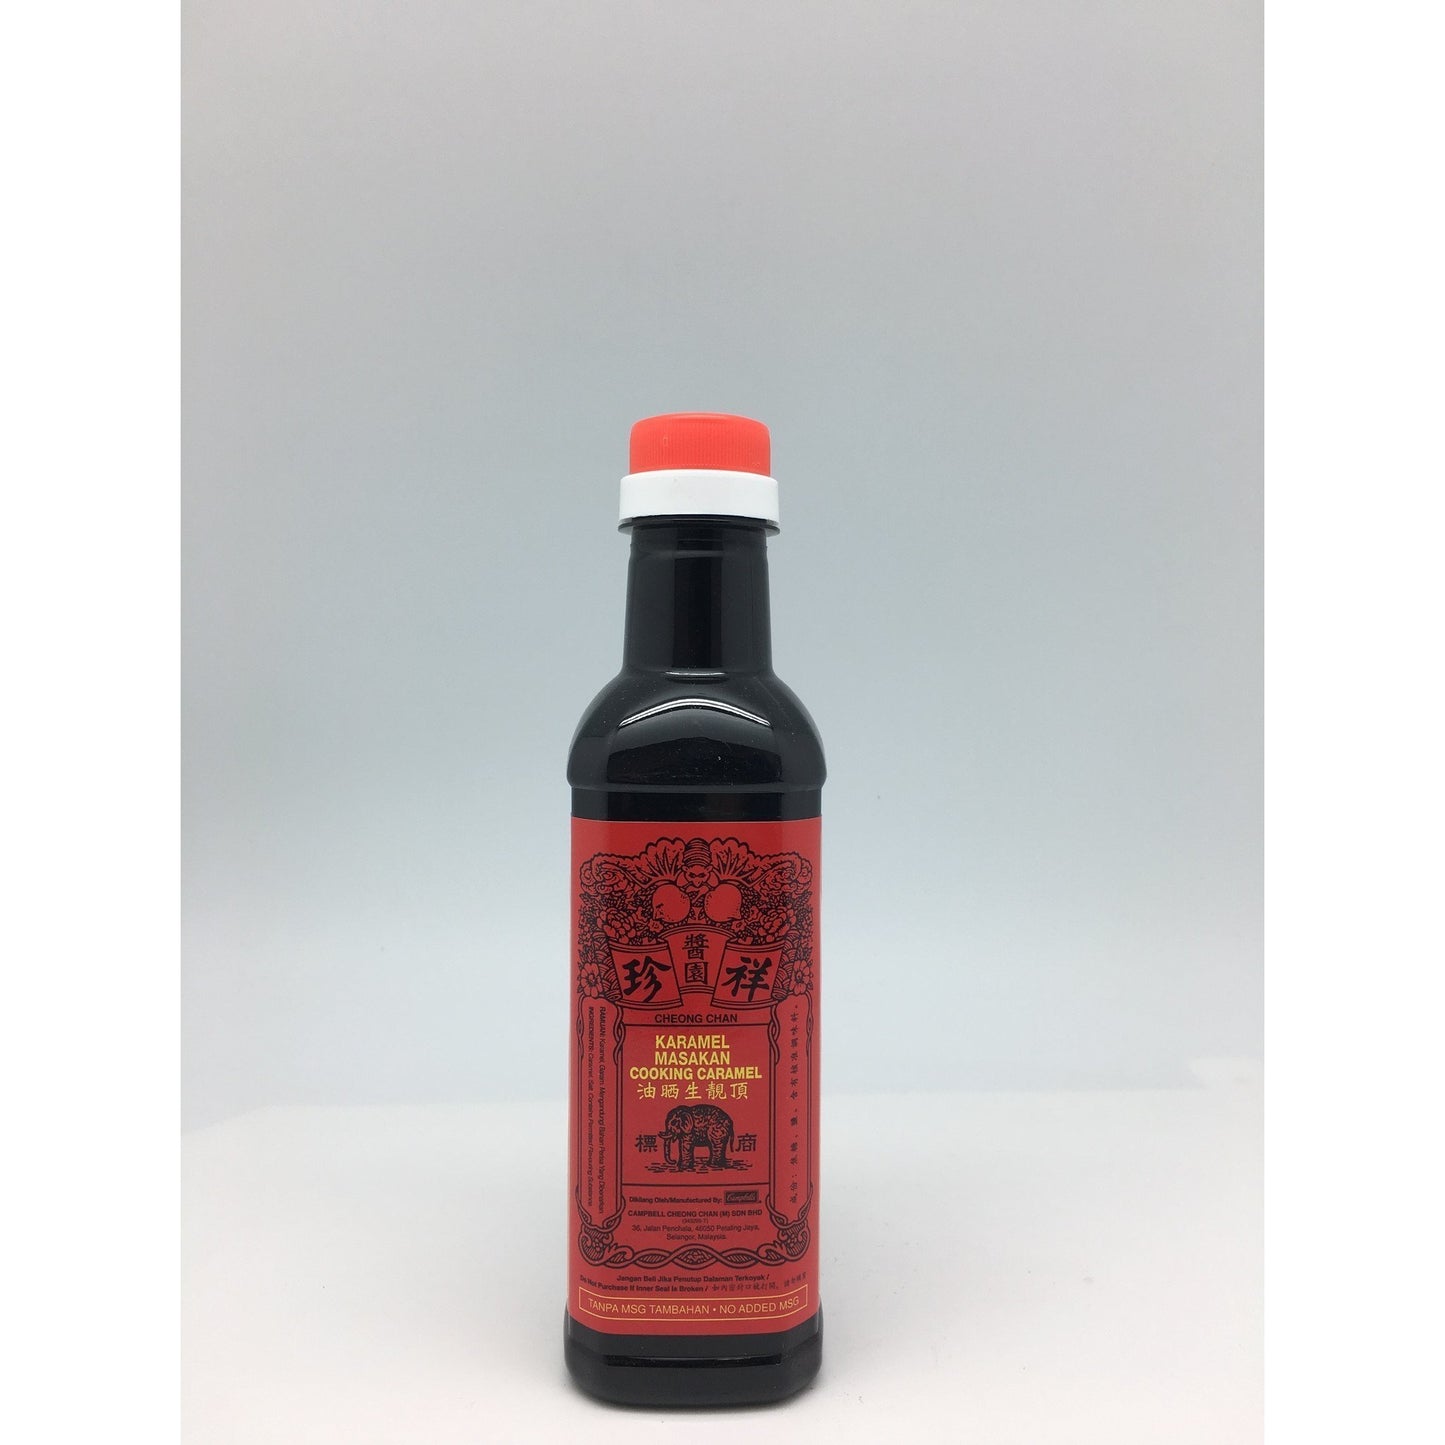 S069S Cheong Chan Brand - Caramel Thick Soy Sauce 375ml -  12 bot / 1ctn - New Eastland Pty Ltd - Asian food wholesalers